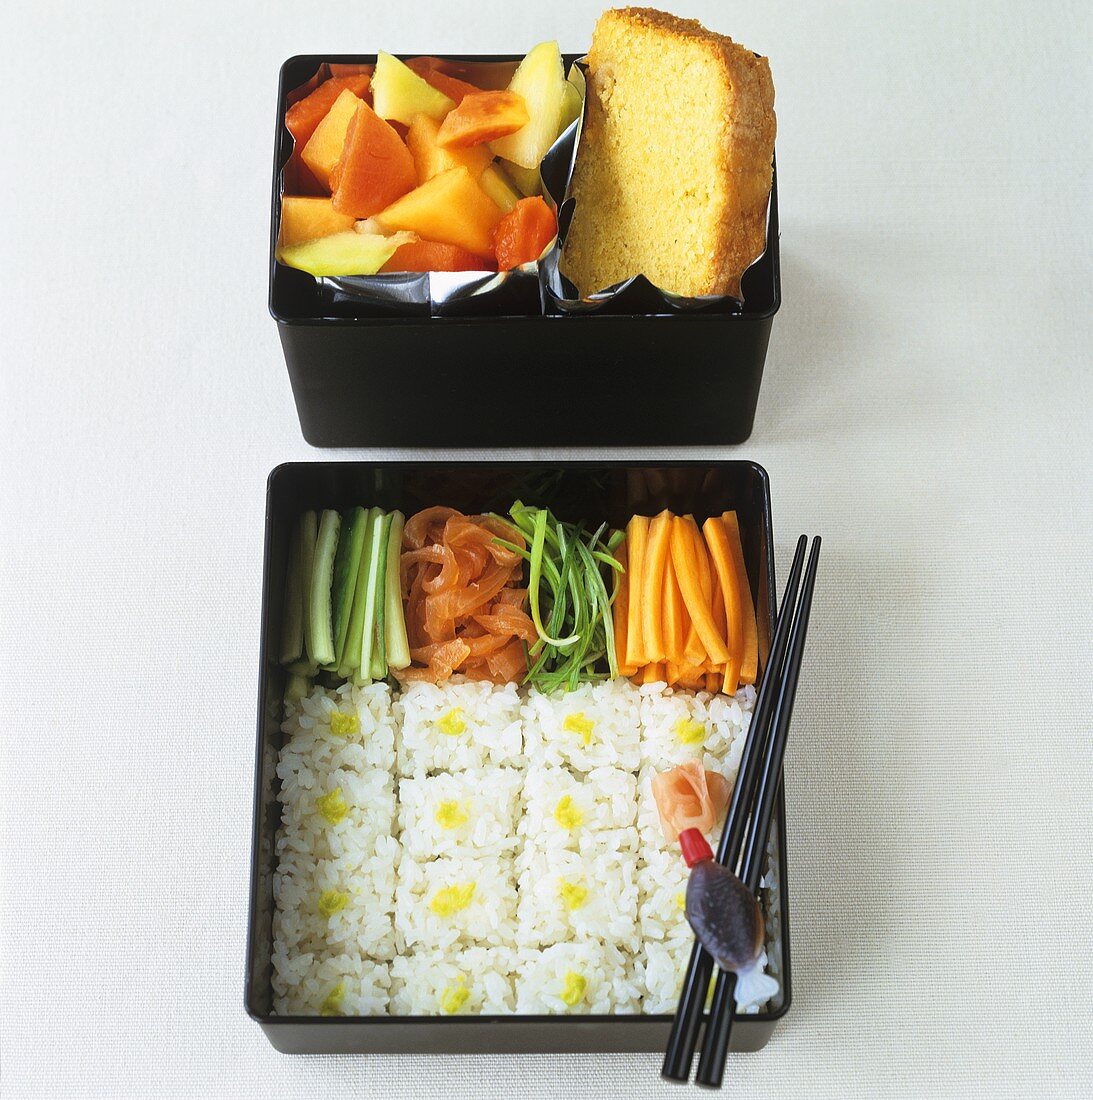 Sushi, vegetables, fruit salad and cake in bento boxes